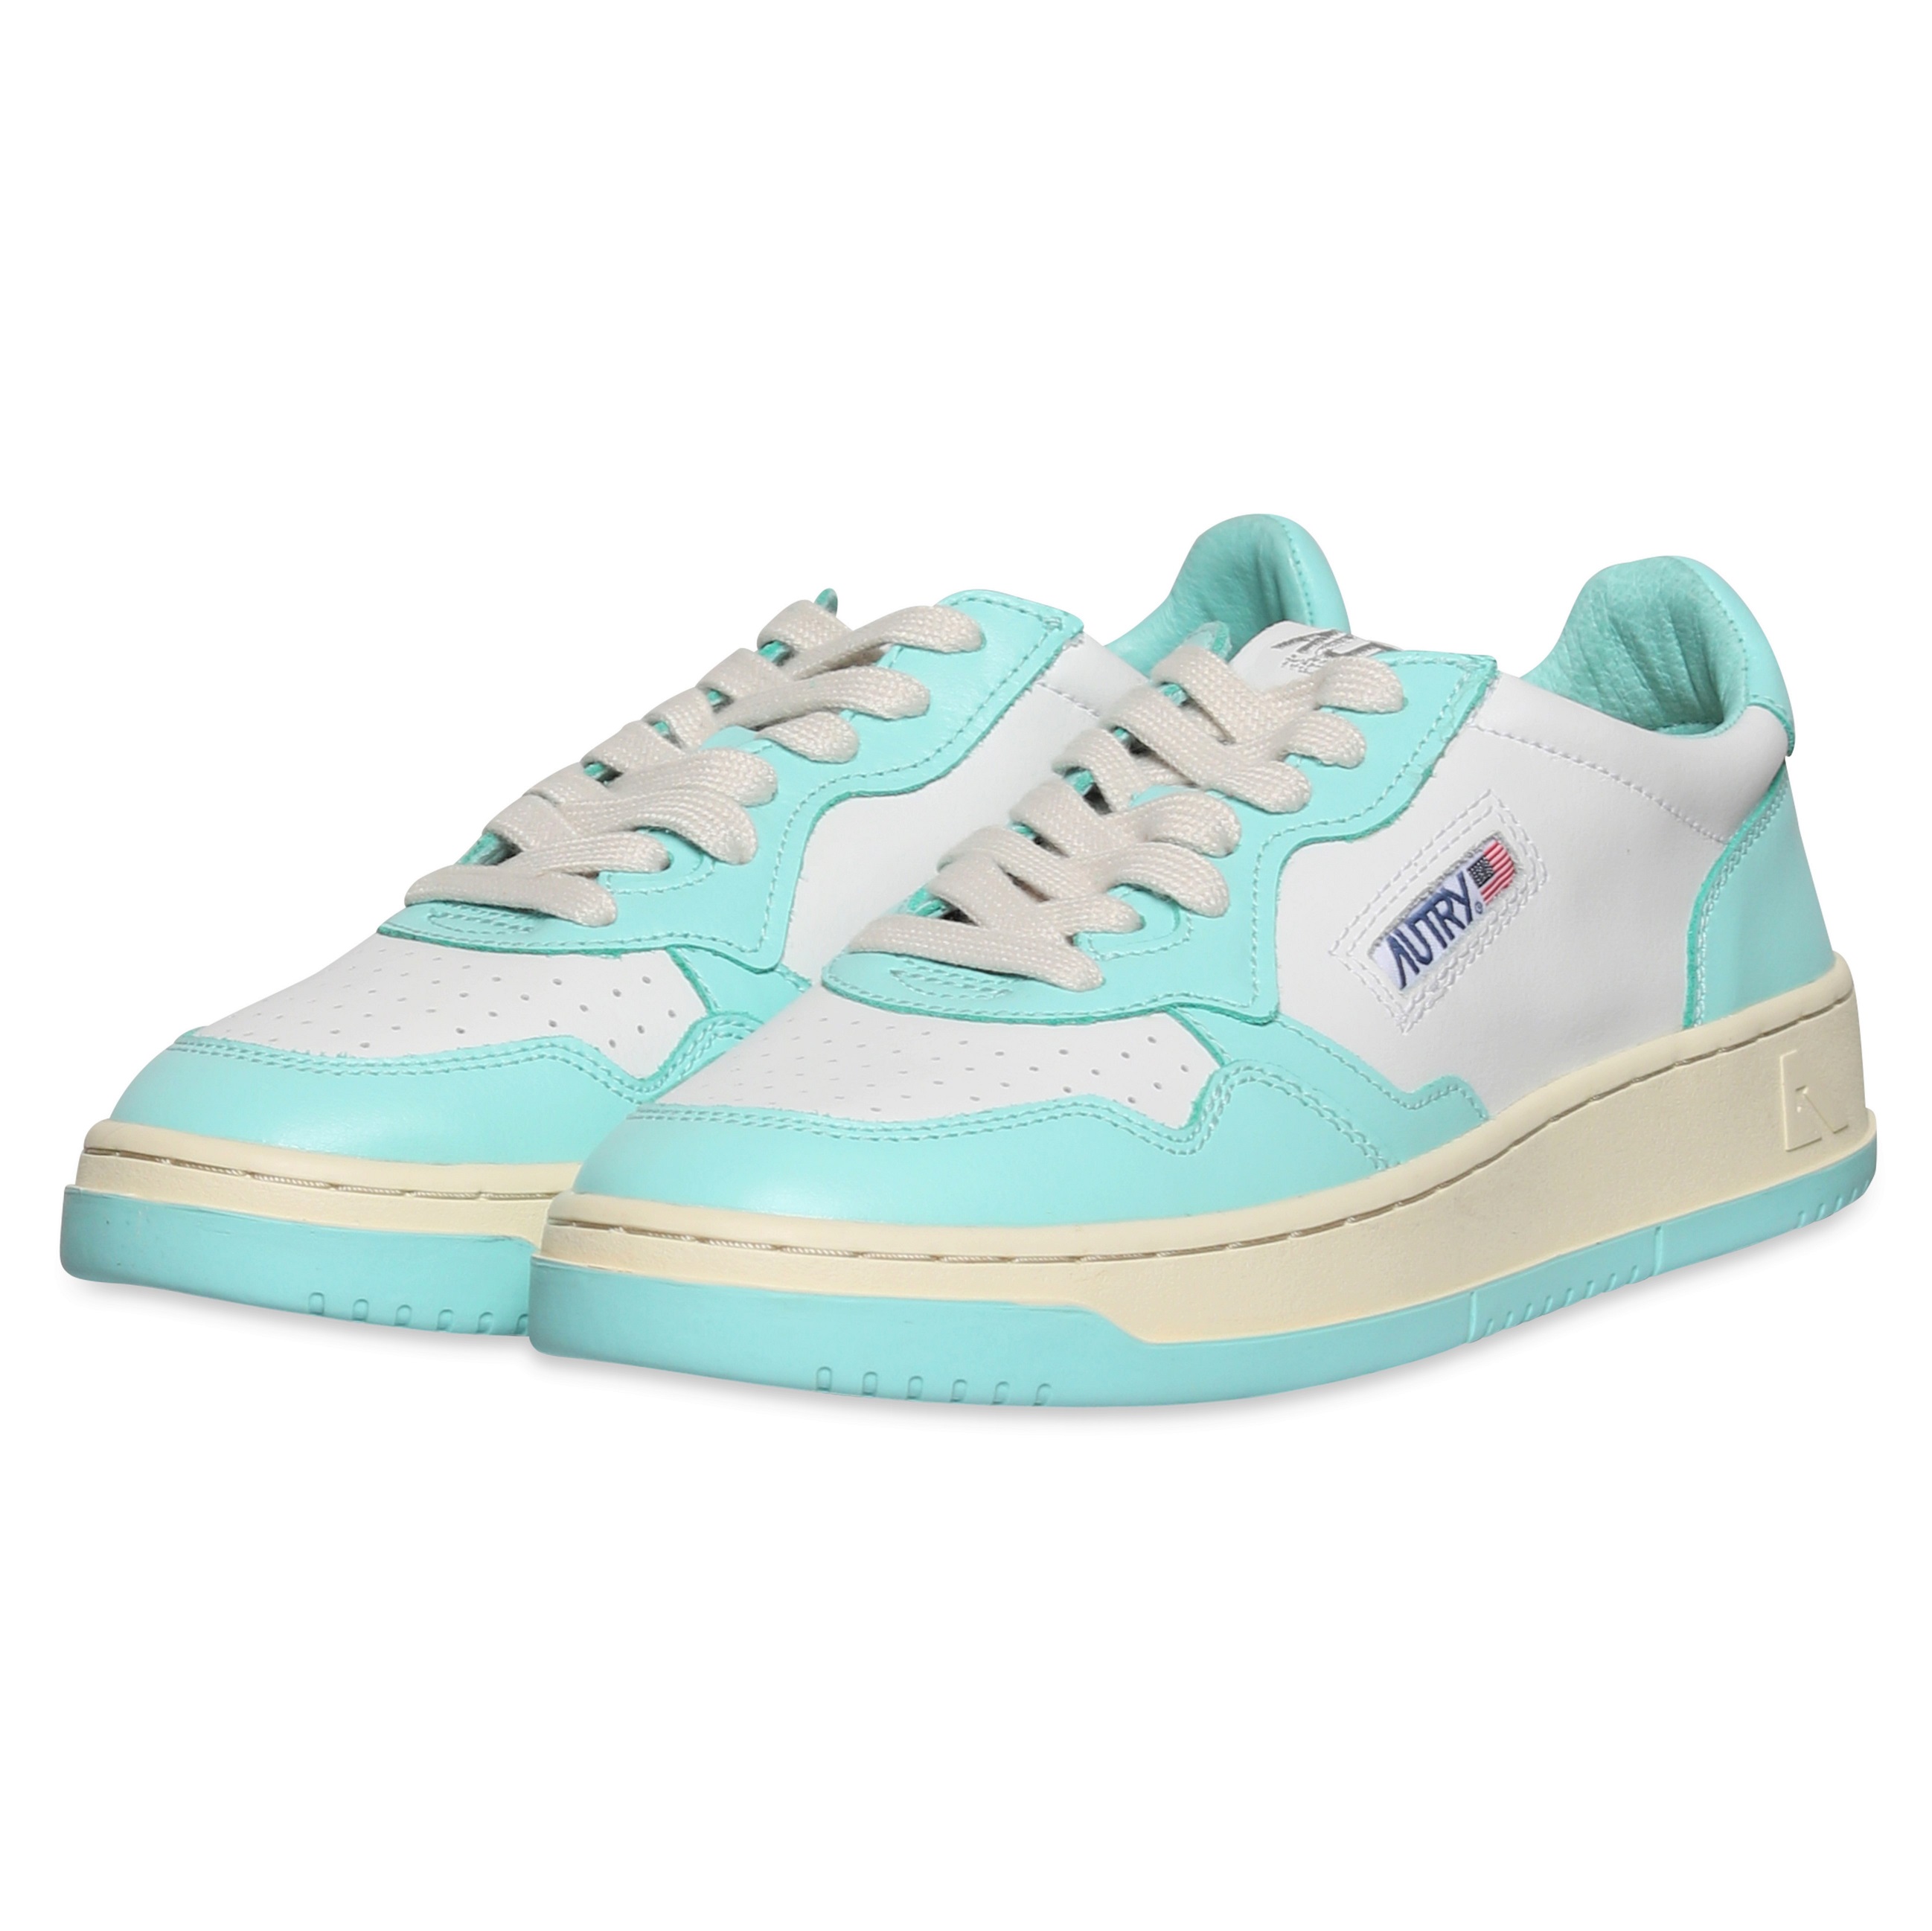 Autry Action Shoes Low Sneaker White/Turquoise 40